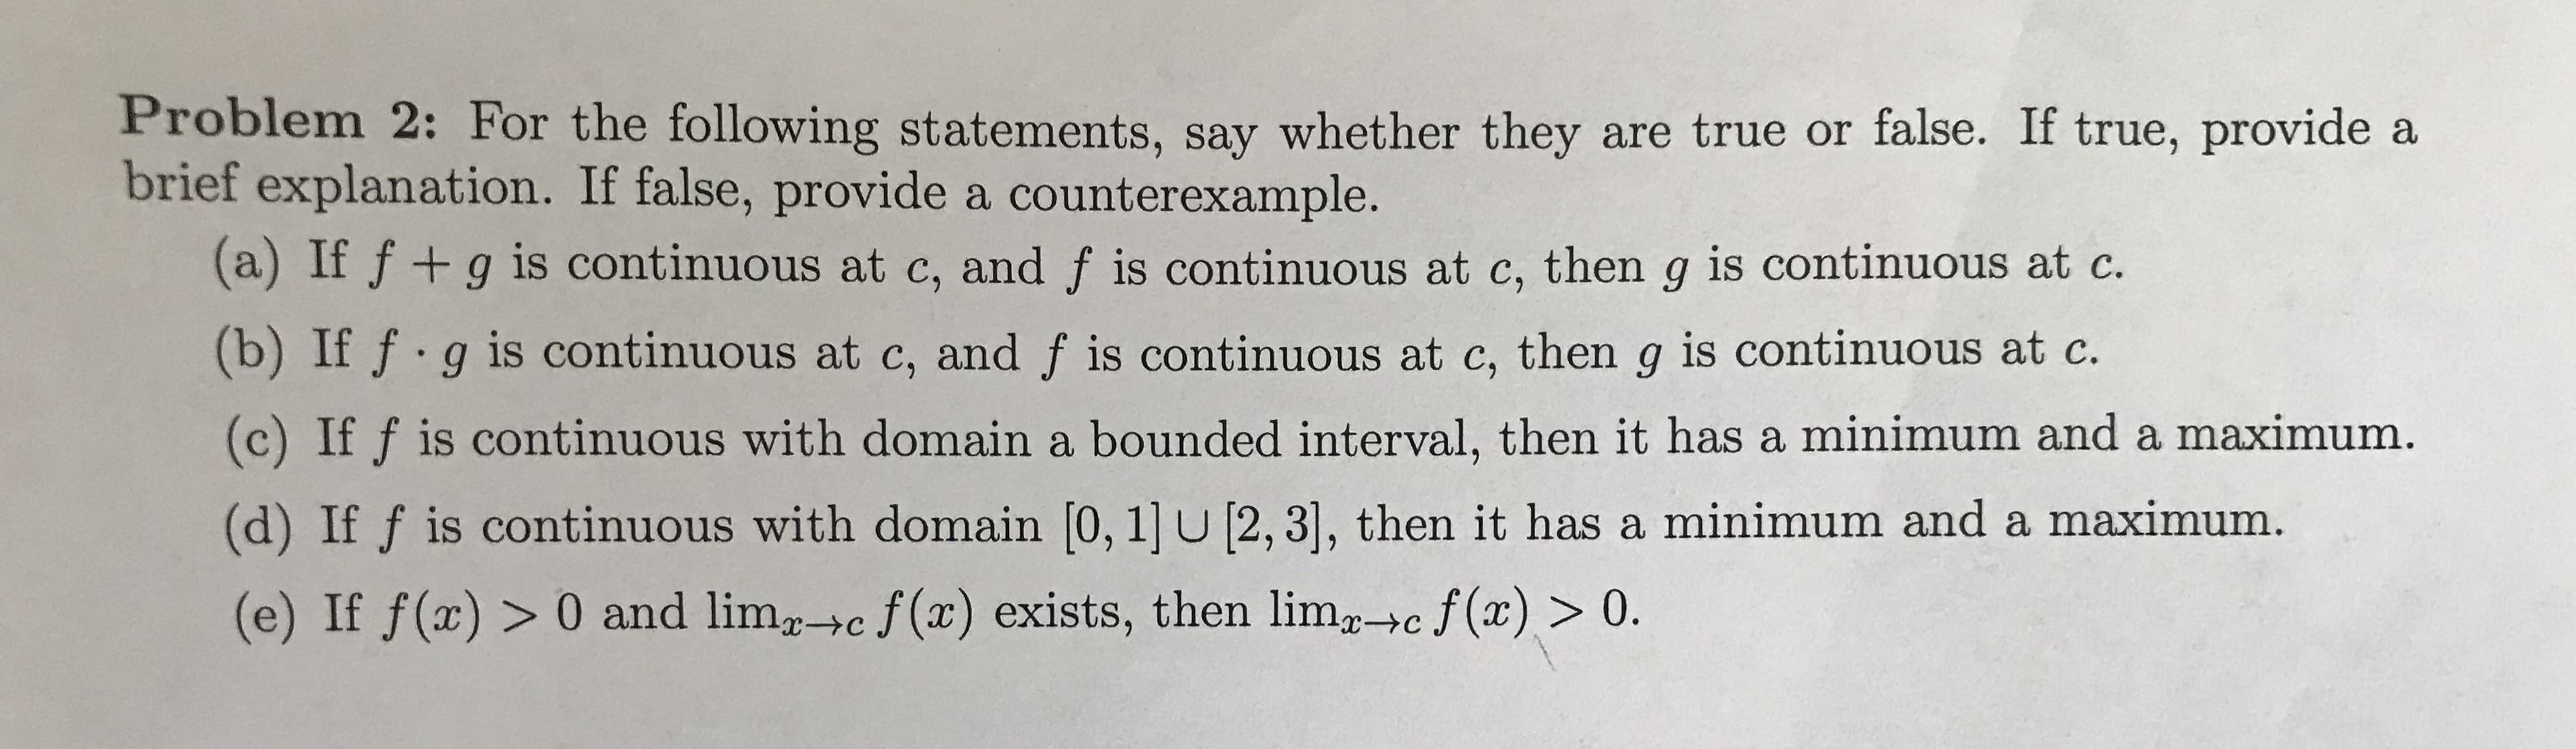 Problem 2: For the following statements, say whether they are true or false. If true, provide a
brief explanation. If false, provide a counterexample.
(a) If f+g is continuous at c, and f is continuous at c, then g is continuous at c
(b) If f.g is continuous at c, and f is continuous at c, then g is continuous at c.
(c) If f is continuous with domain a bounded interval, then it has a minimum and a maximum.
(d) If f is continuous with domain [0, 1] u [2, 3], then it has a minimum and a maximum.
(e) If f(x)> 0 and limc f(x) exists, then lim+c f(x)> 0.
